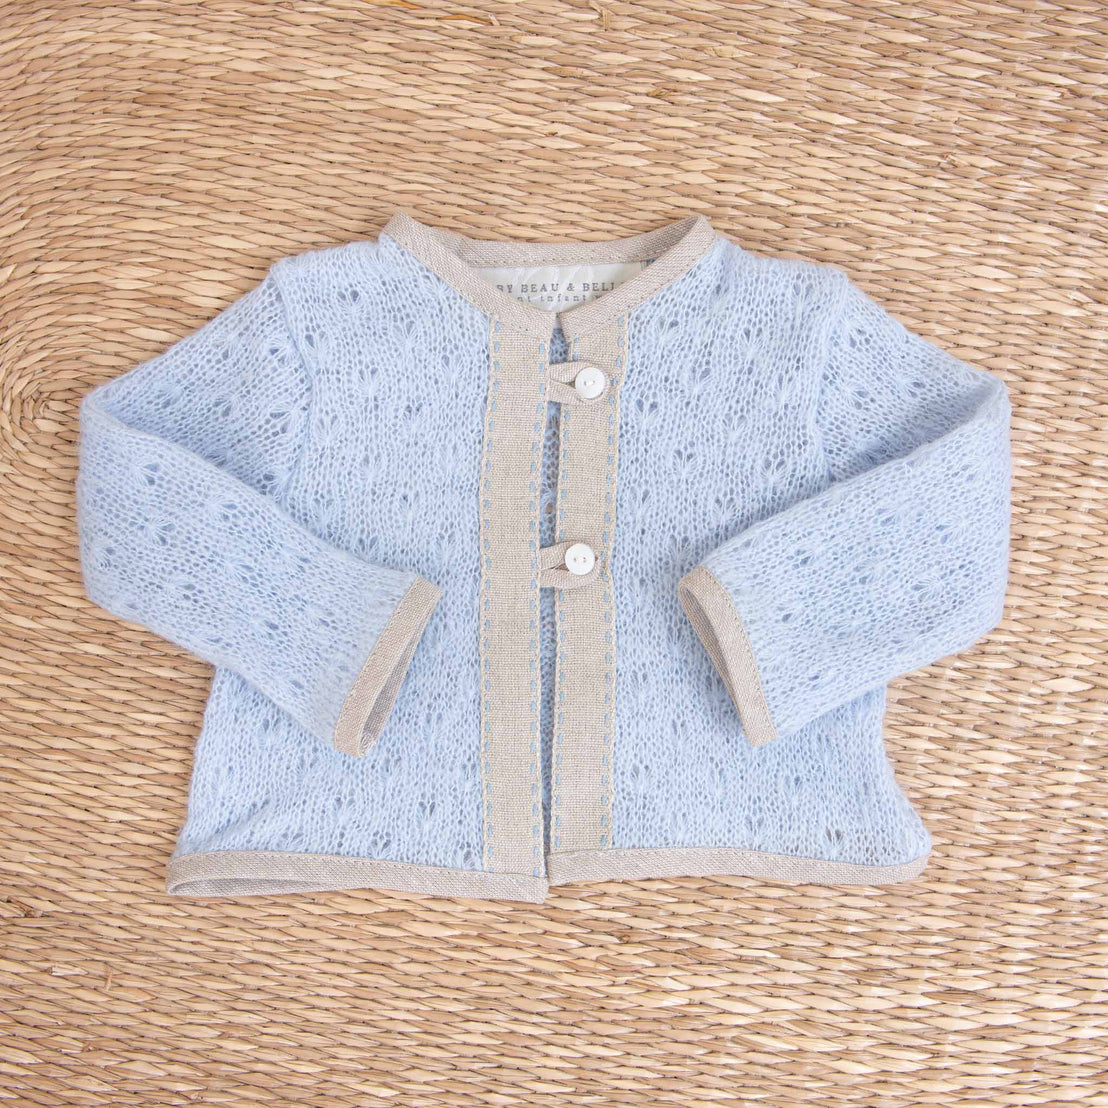 A baby's upscale, light blue Austin Sweater with white buttons lies flat on a woven straw background, featuring boutique beige knitted trim detailing.